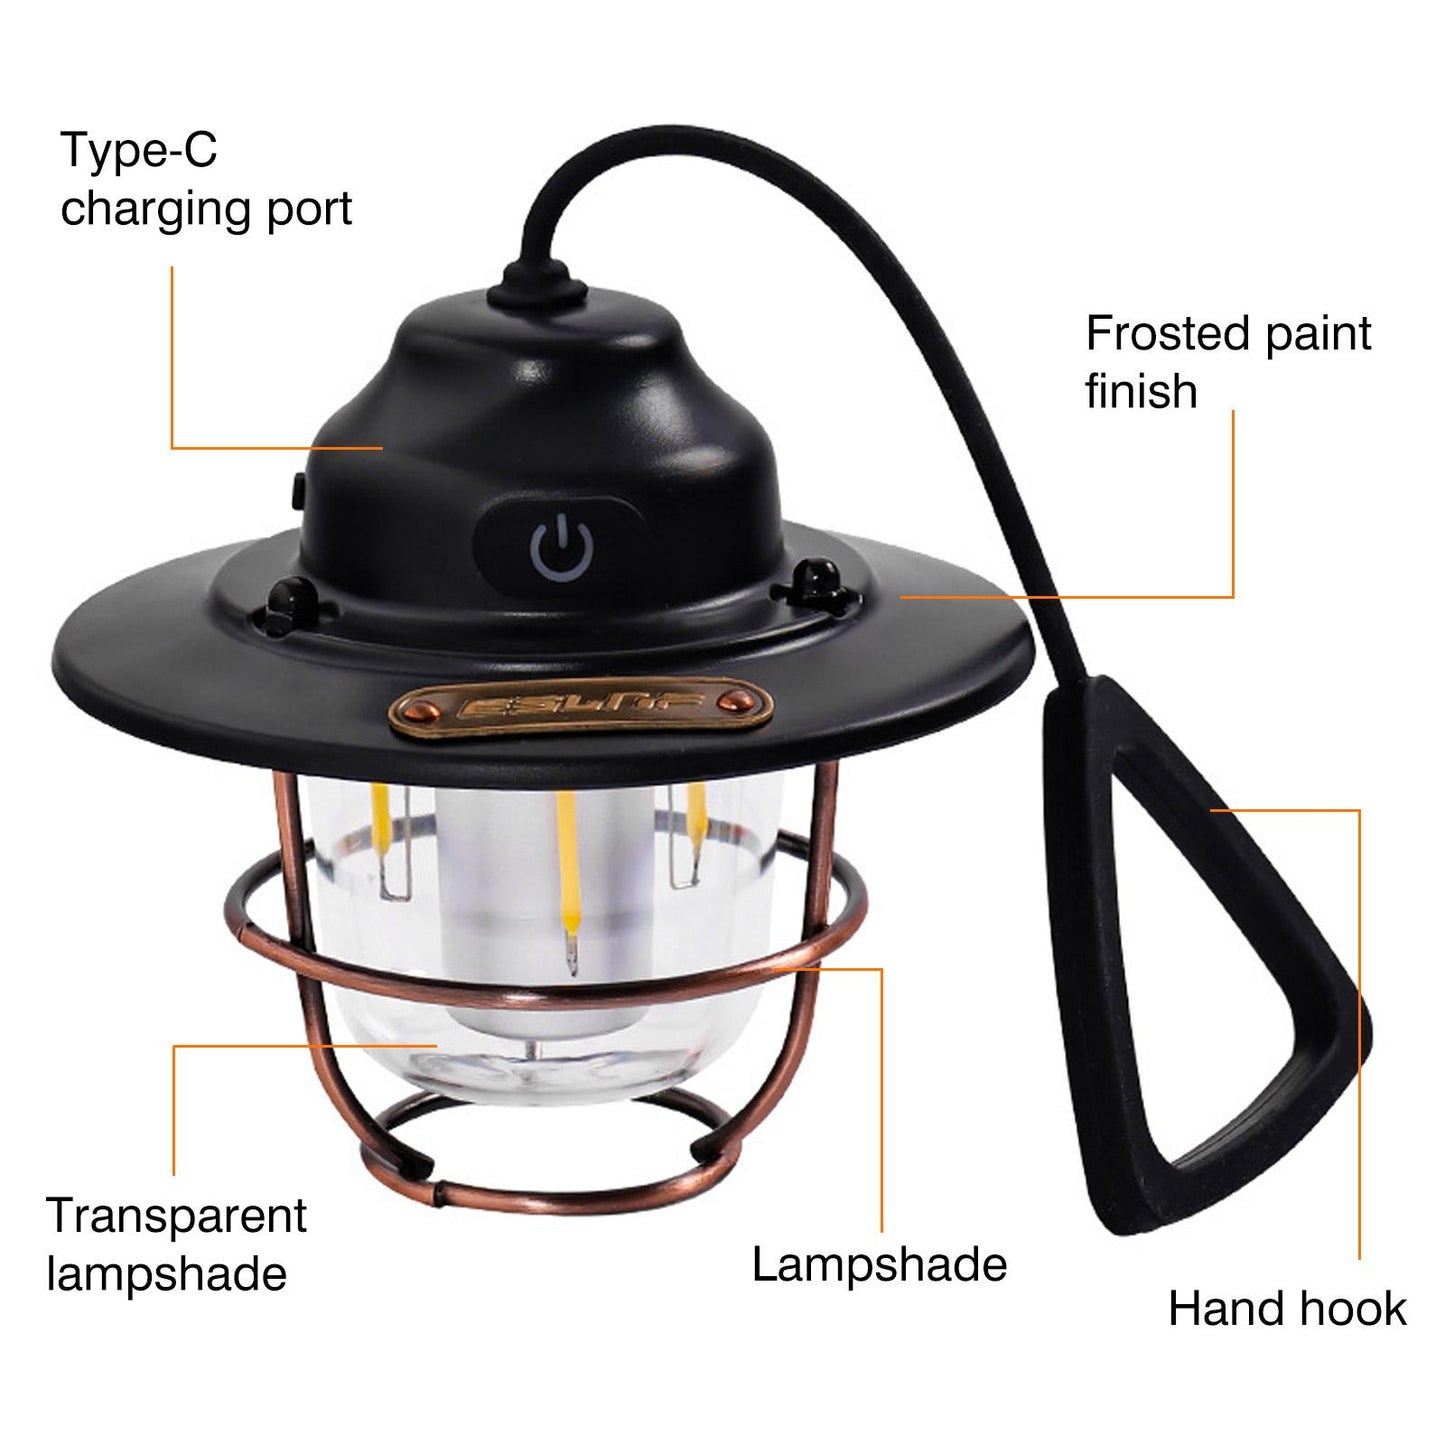 Night Scape Outdoor Camping Light